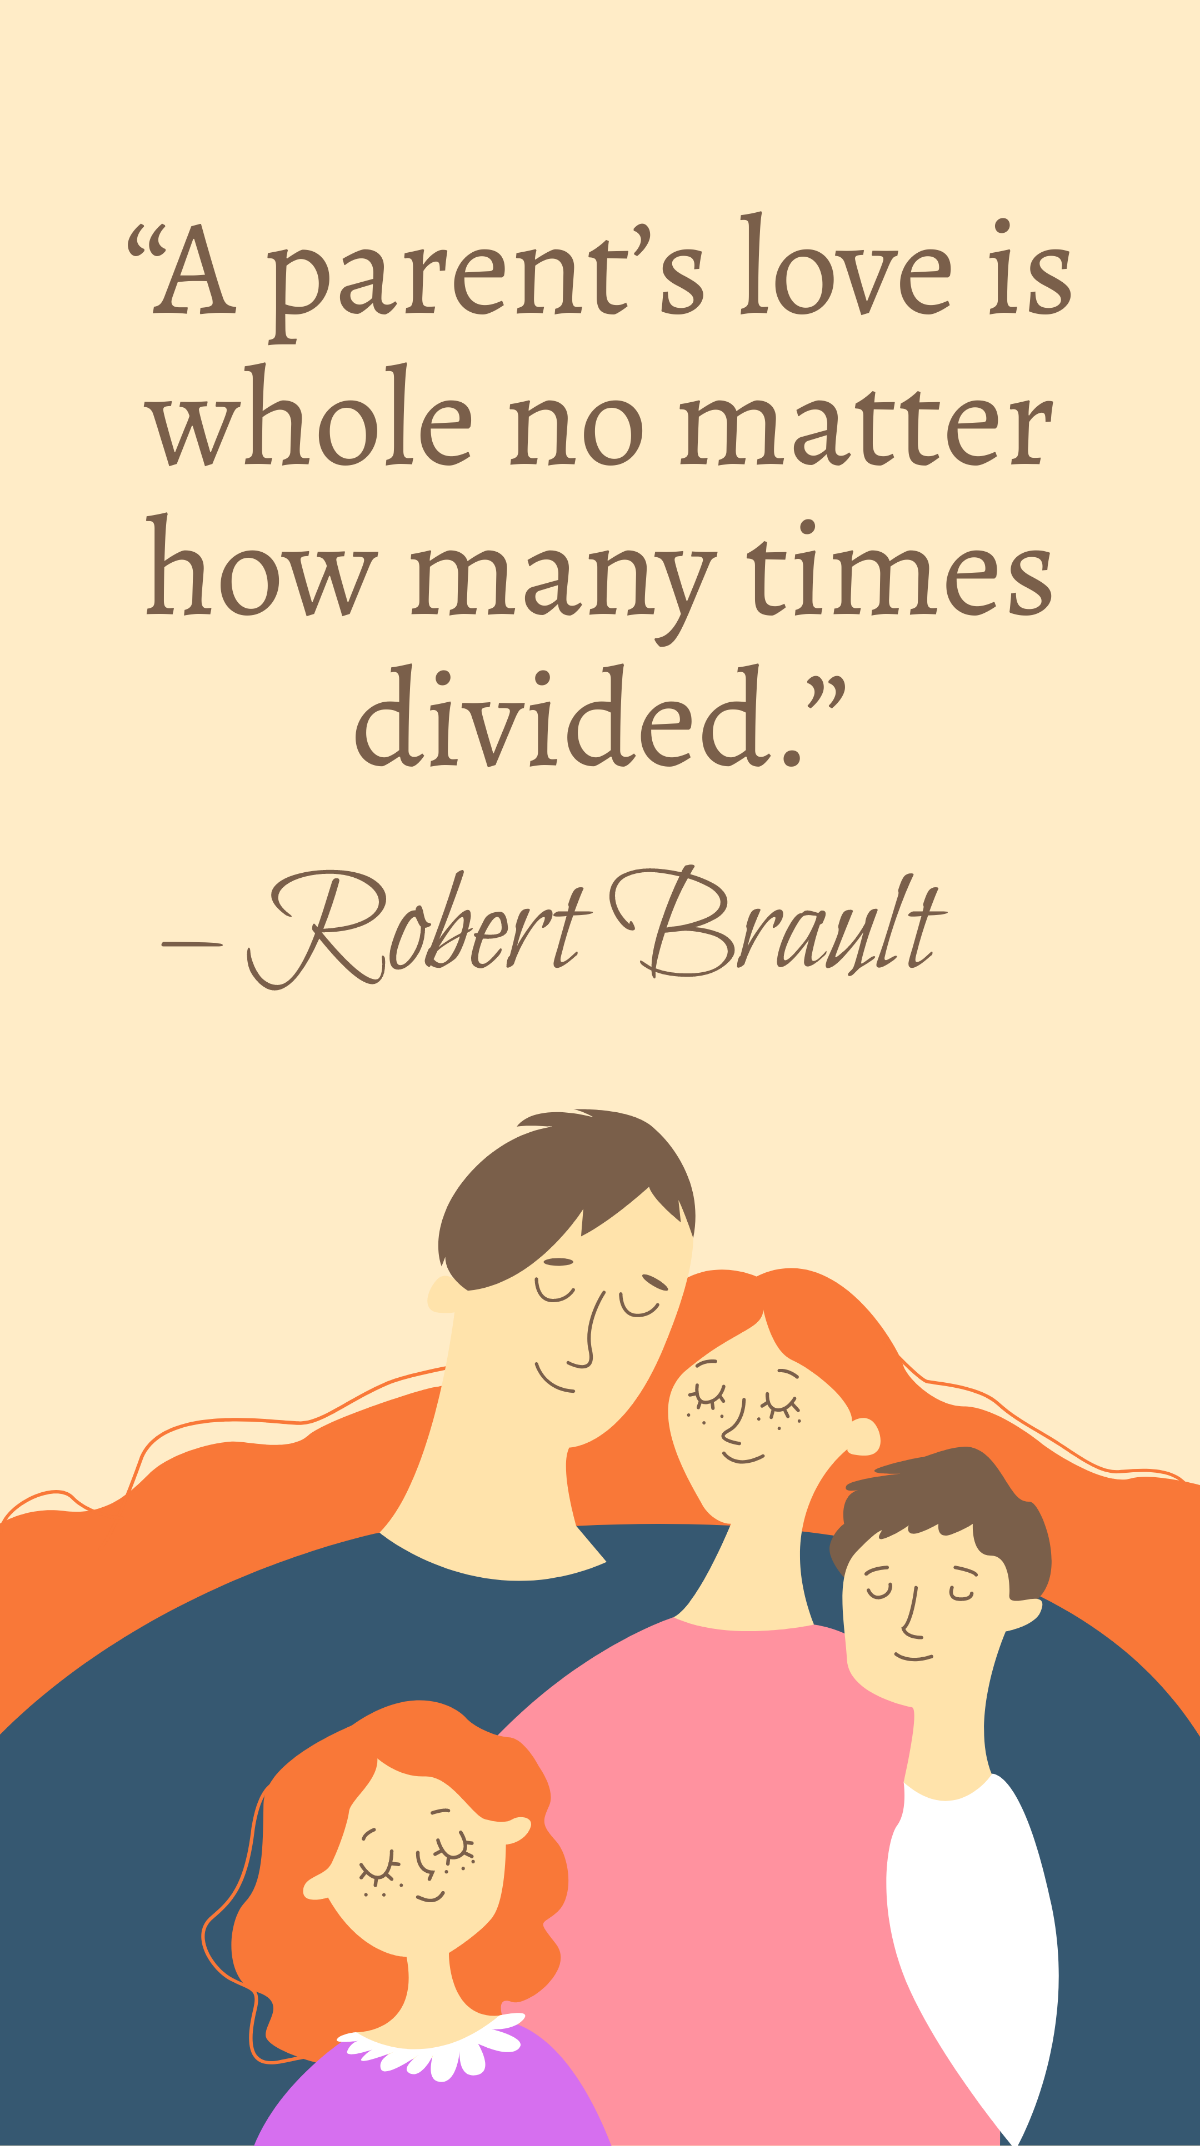 Free Robert Brault - “A parent’s love is whole no matter how many times divided.” Template